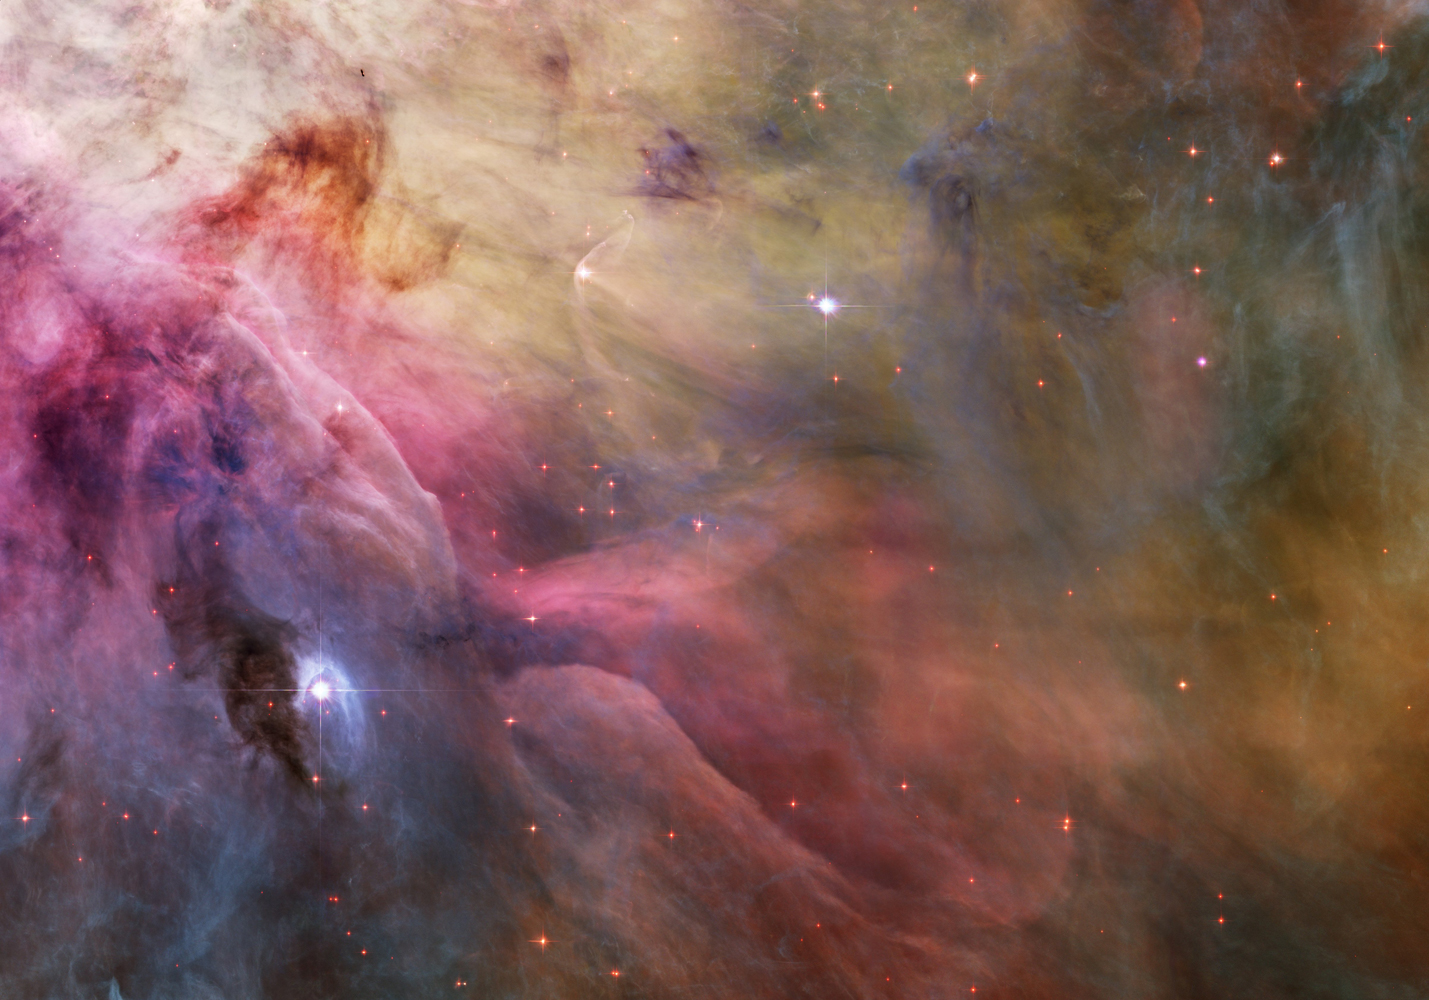 This close-up of cosmic clouds and stellar winds features LL Orionis, interacting with the Orion Nebula flow. Adrift in Orion's stellar nursery and still in its formative years, variable star LL Orionis produces a wind more energetic than the wind from our own middle-aged Sun.